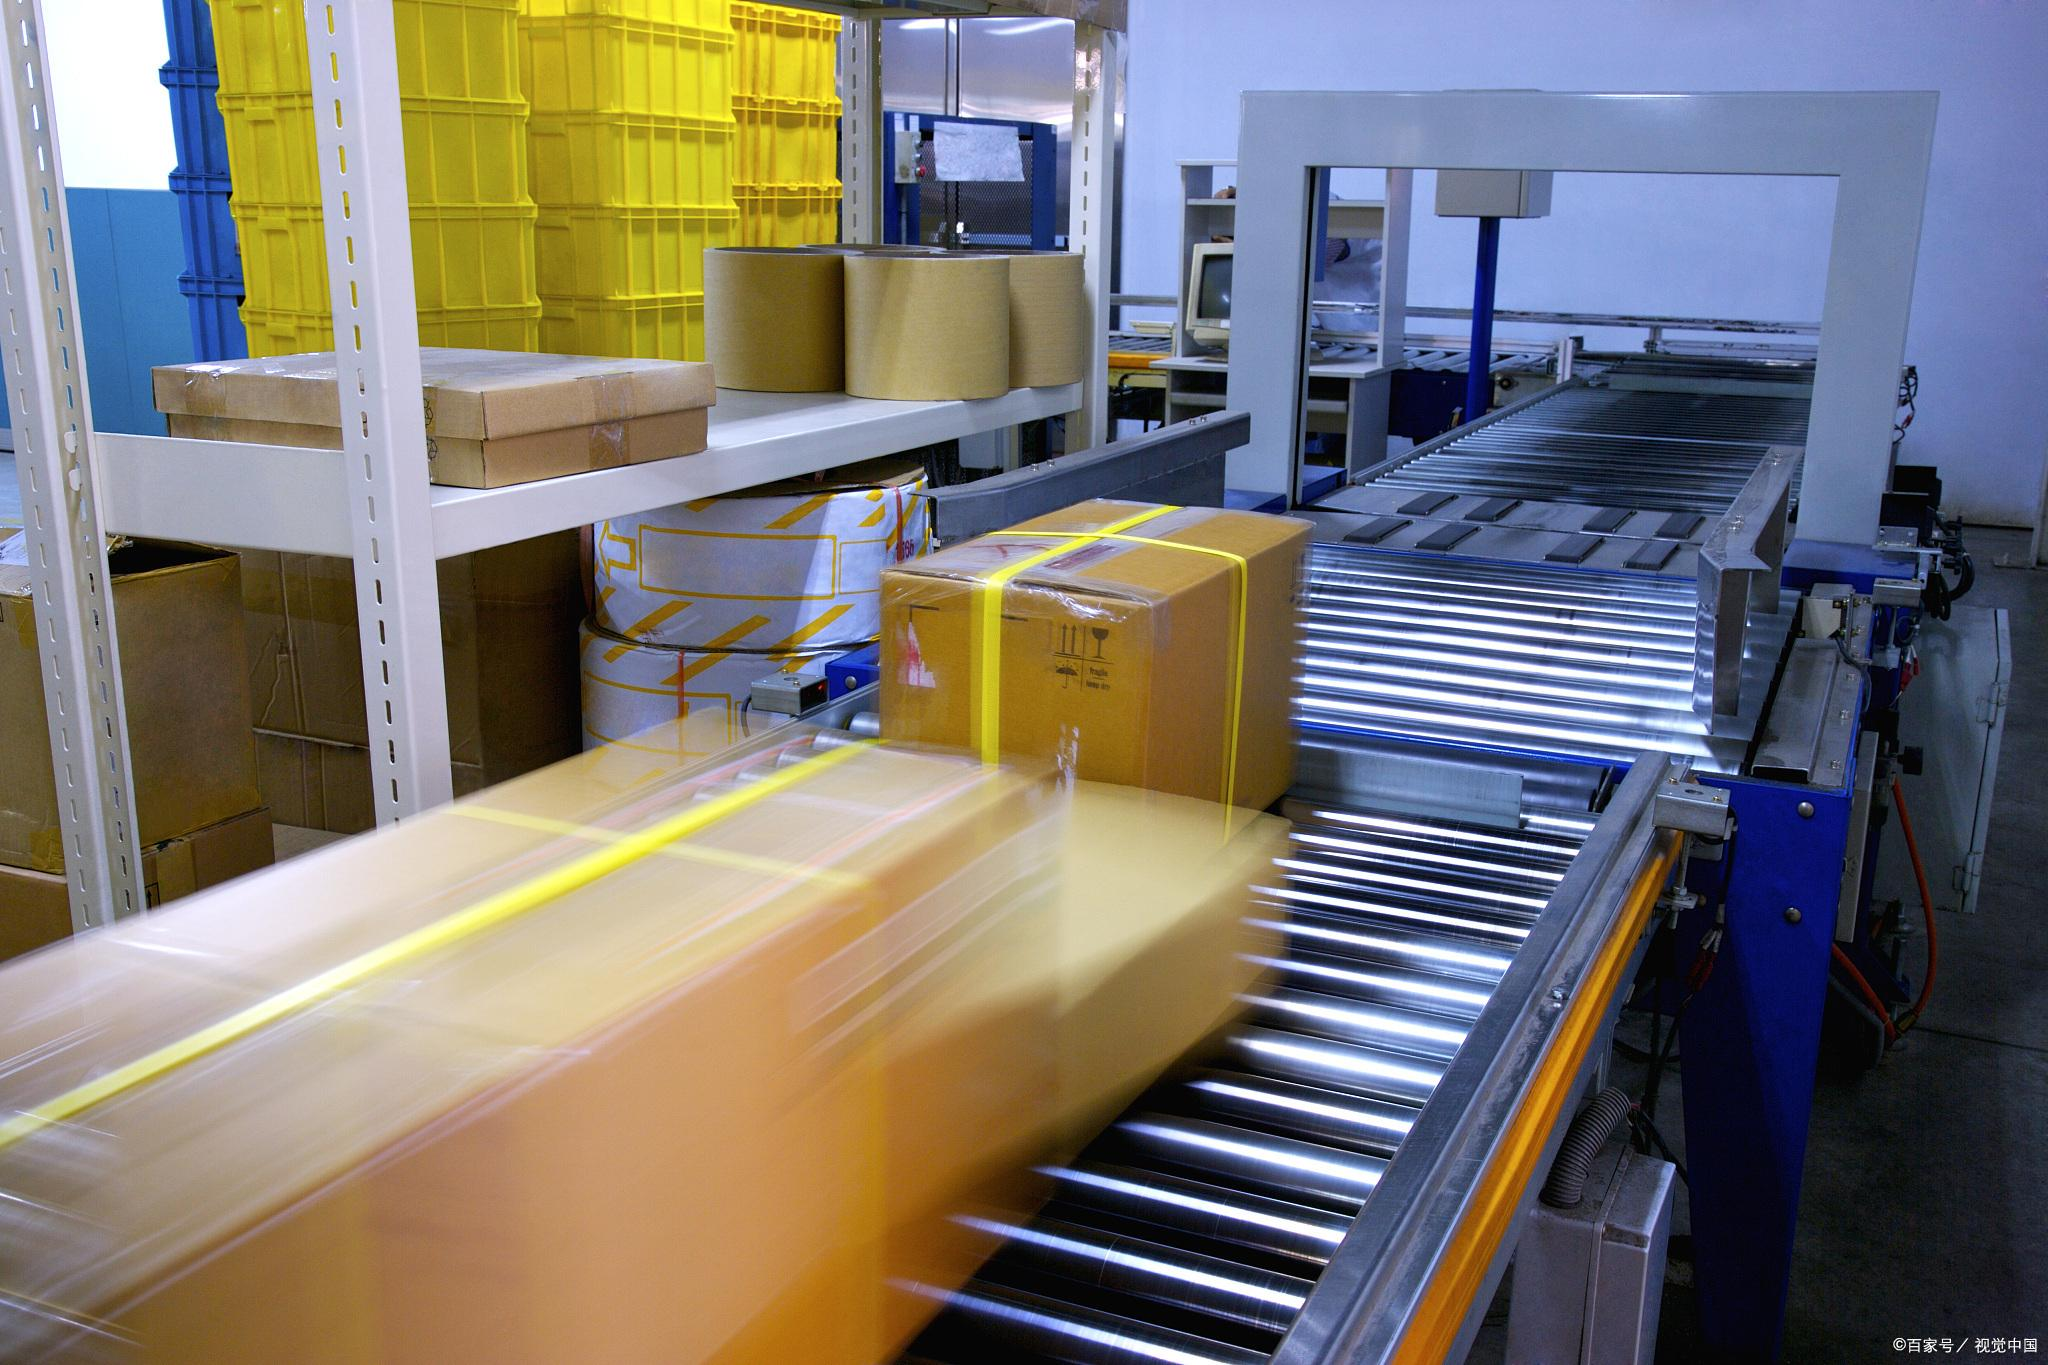 Automation equipment promotes the transformation and upgrading of smart logistics